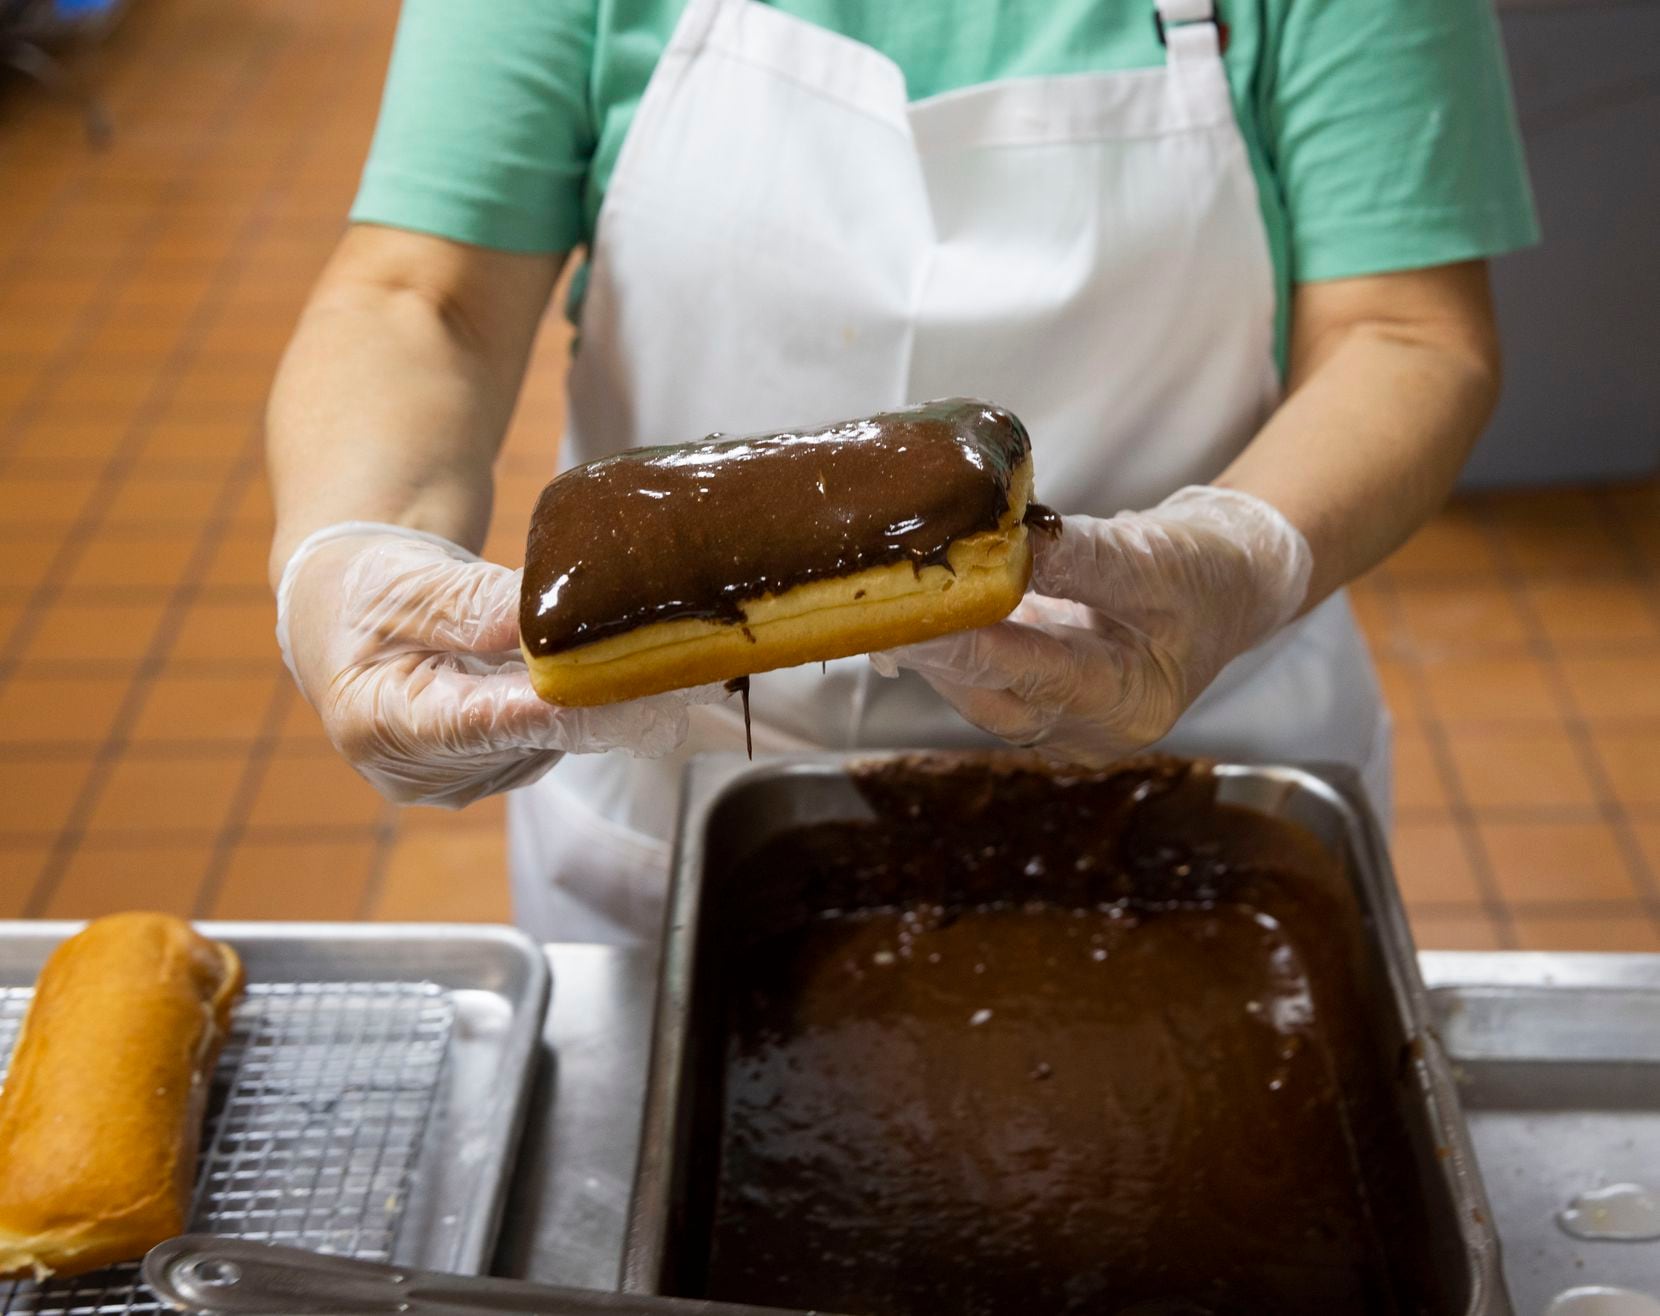 Maria Mendoza, who has been working at Lone Star Donuts for over 30 years, glazes a...